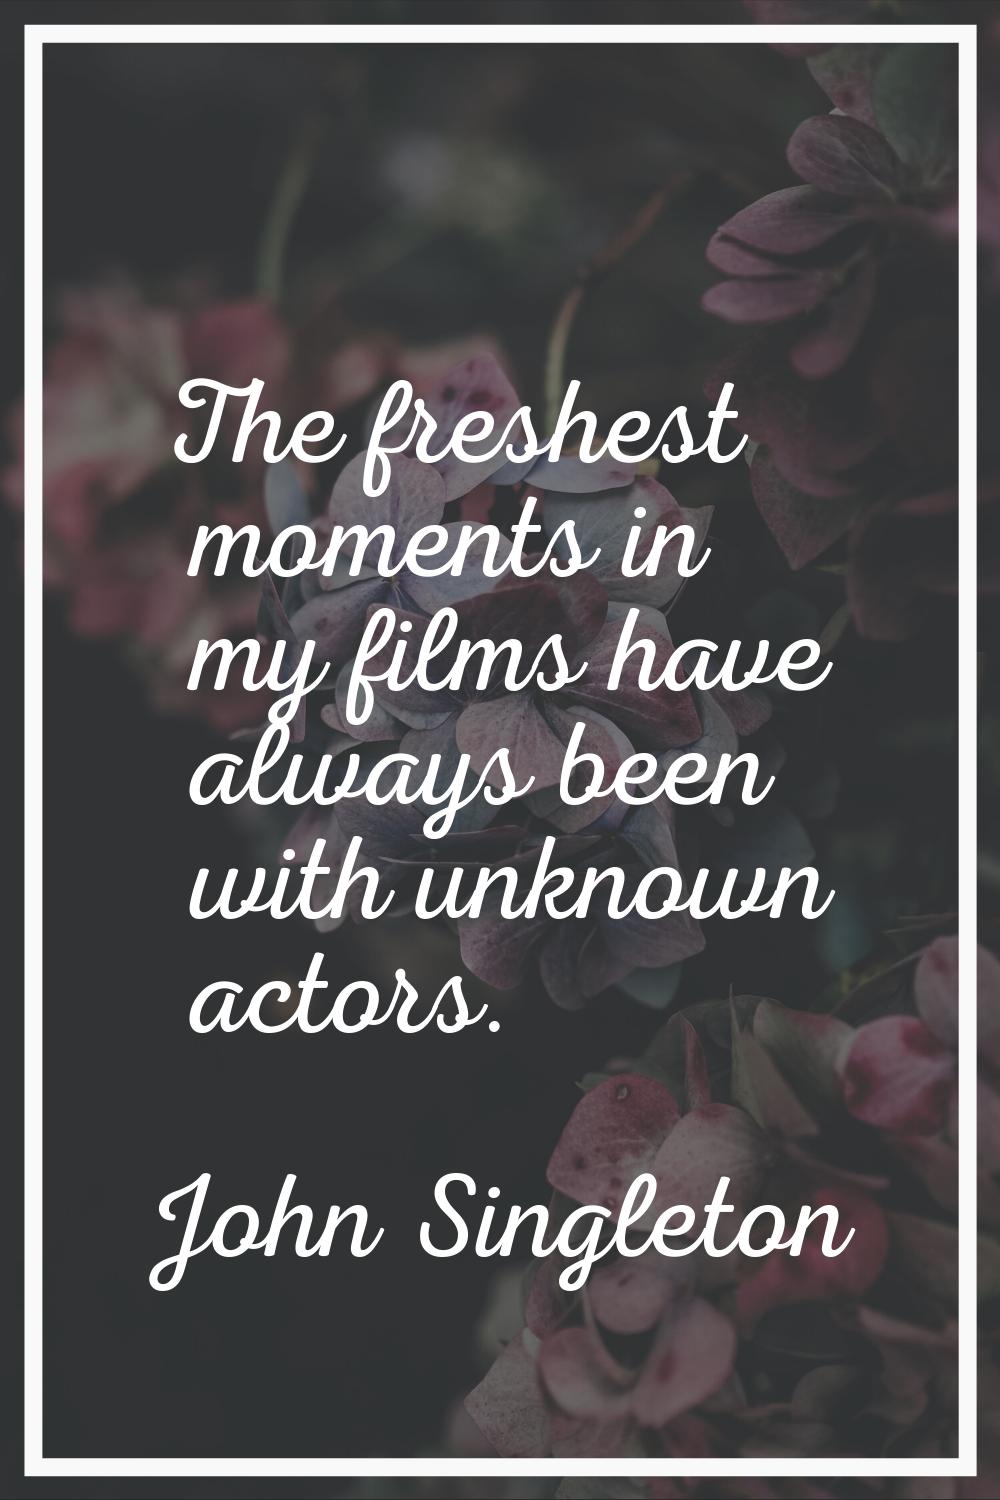 The freshest moments in my films have always been with unknown actors.